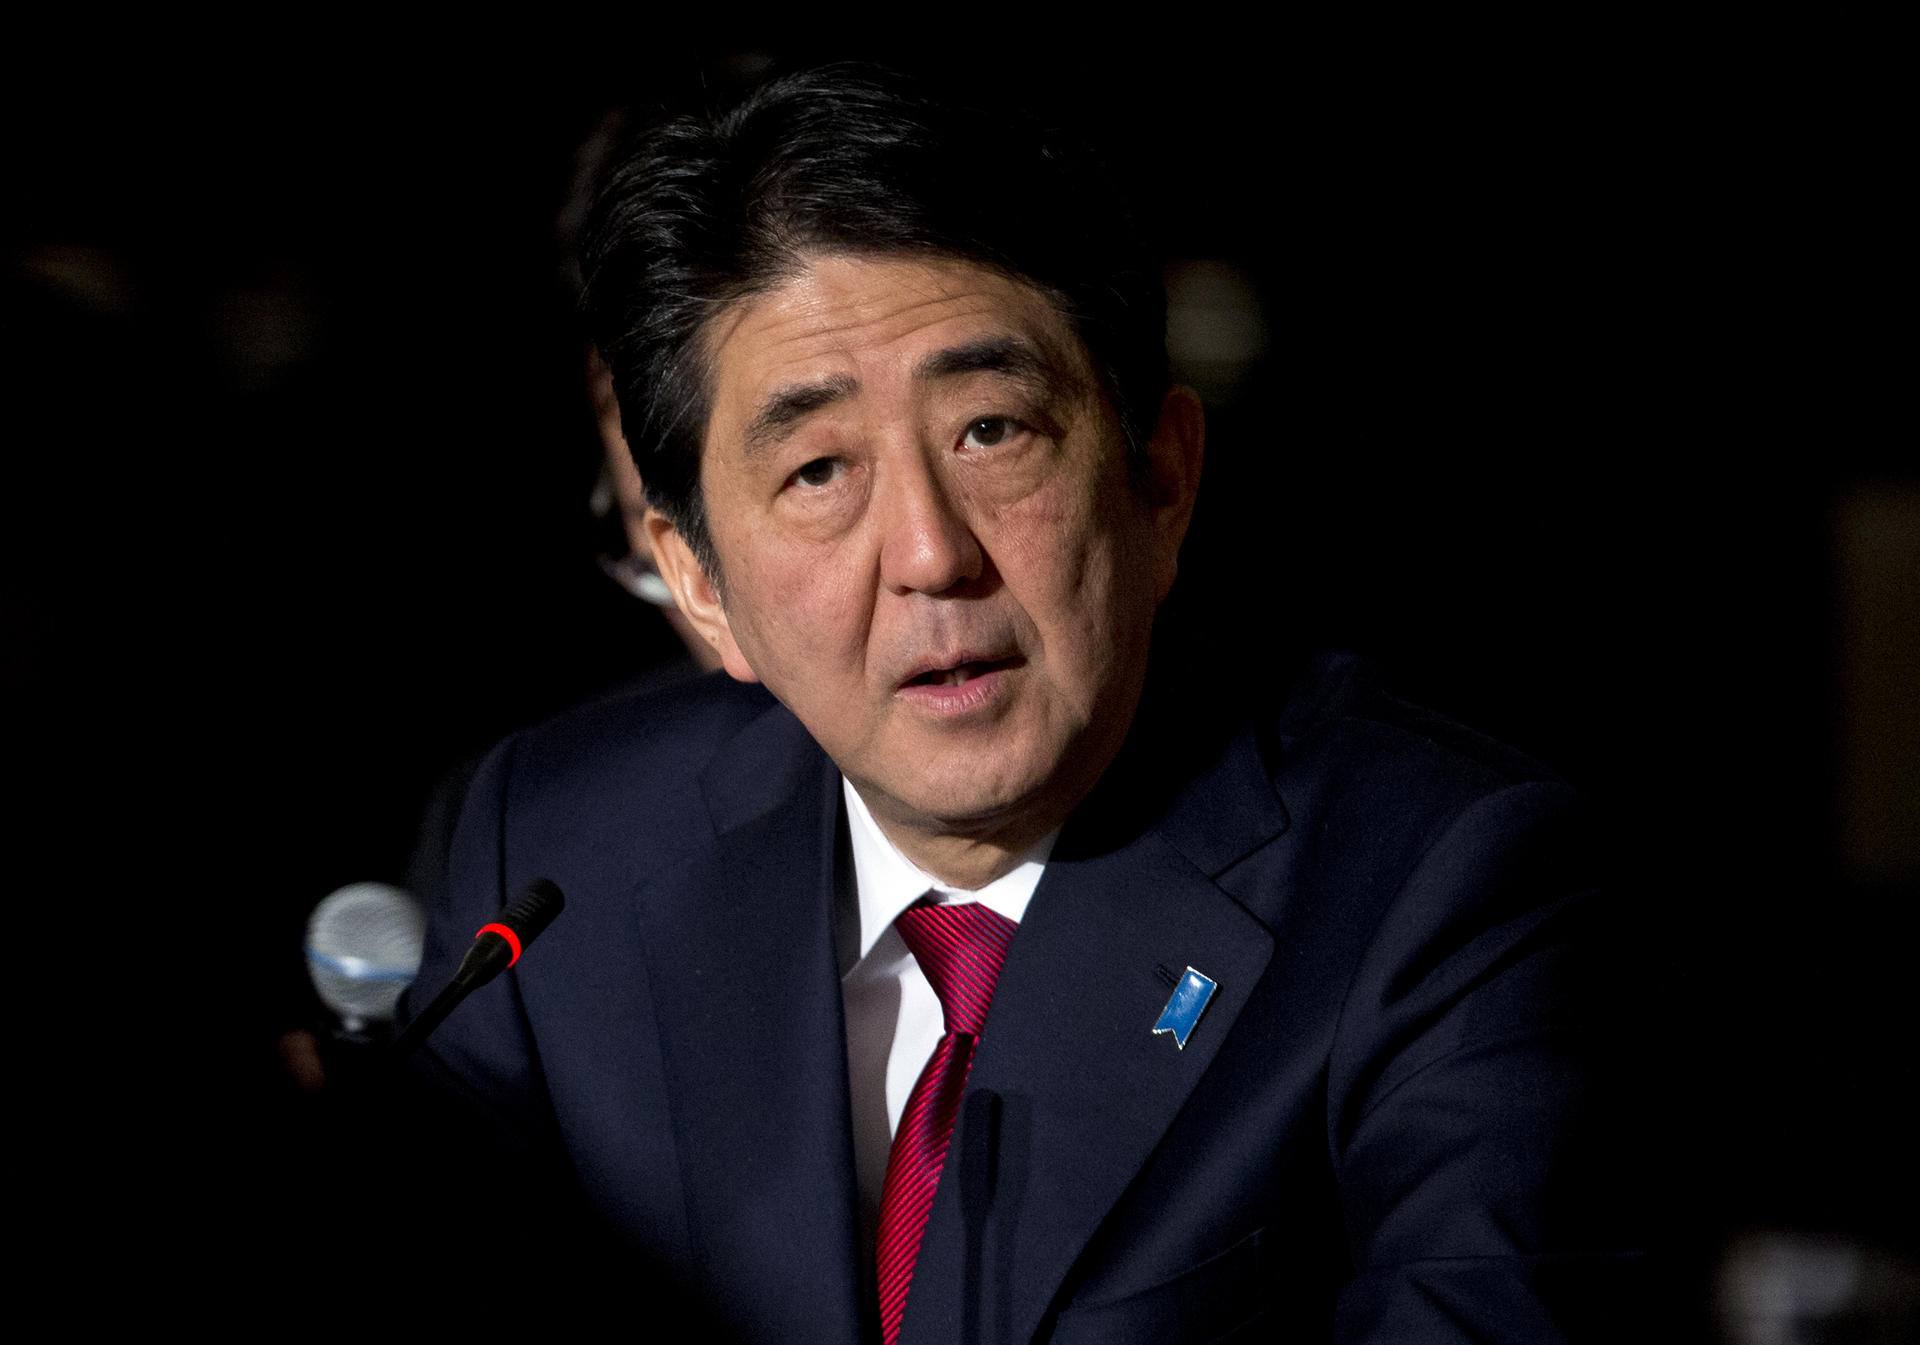 Japanese Prime Minister Shinzo Abe expressed "deep repentance" over Japan's role in the second world war, but he stopped of issuing an apology.